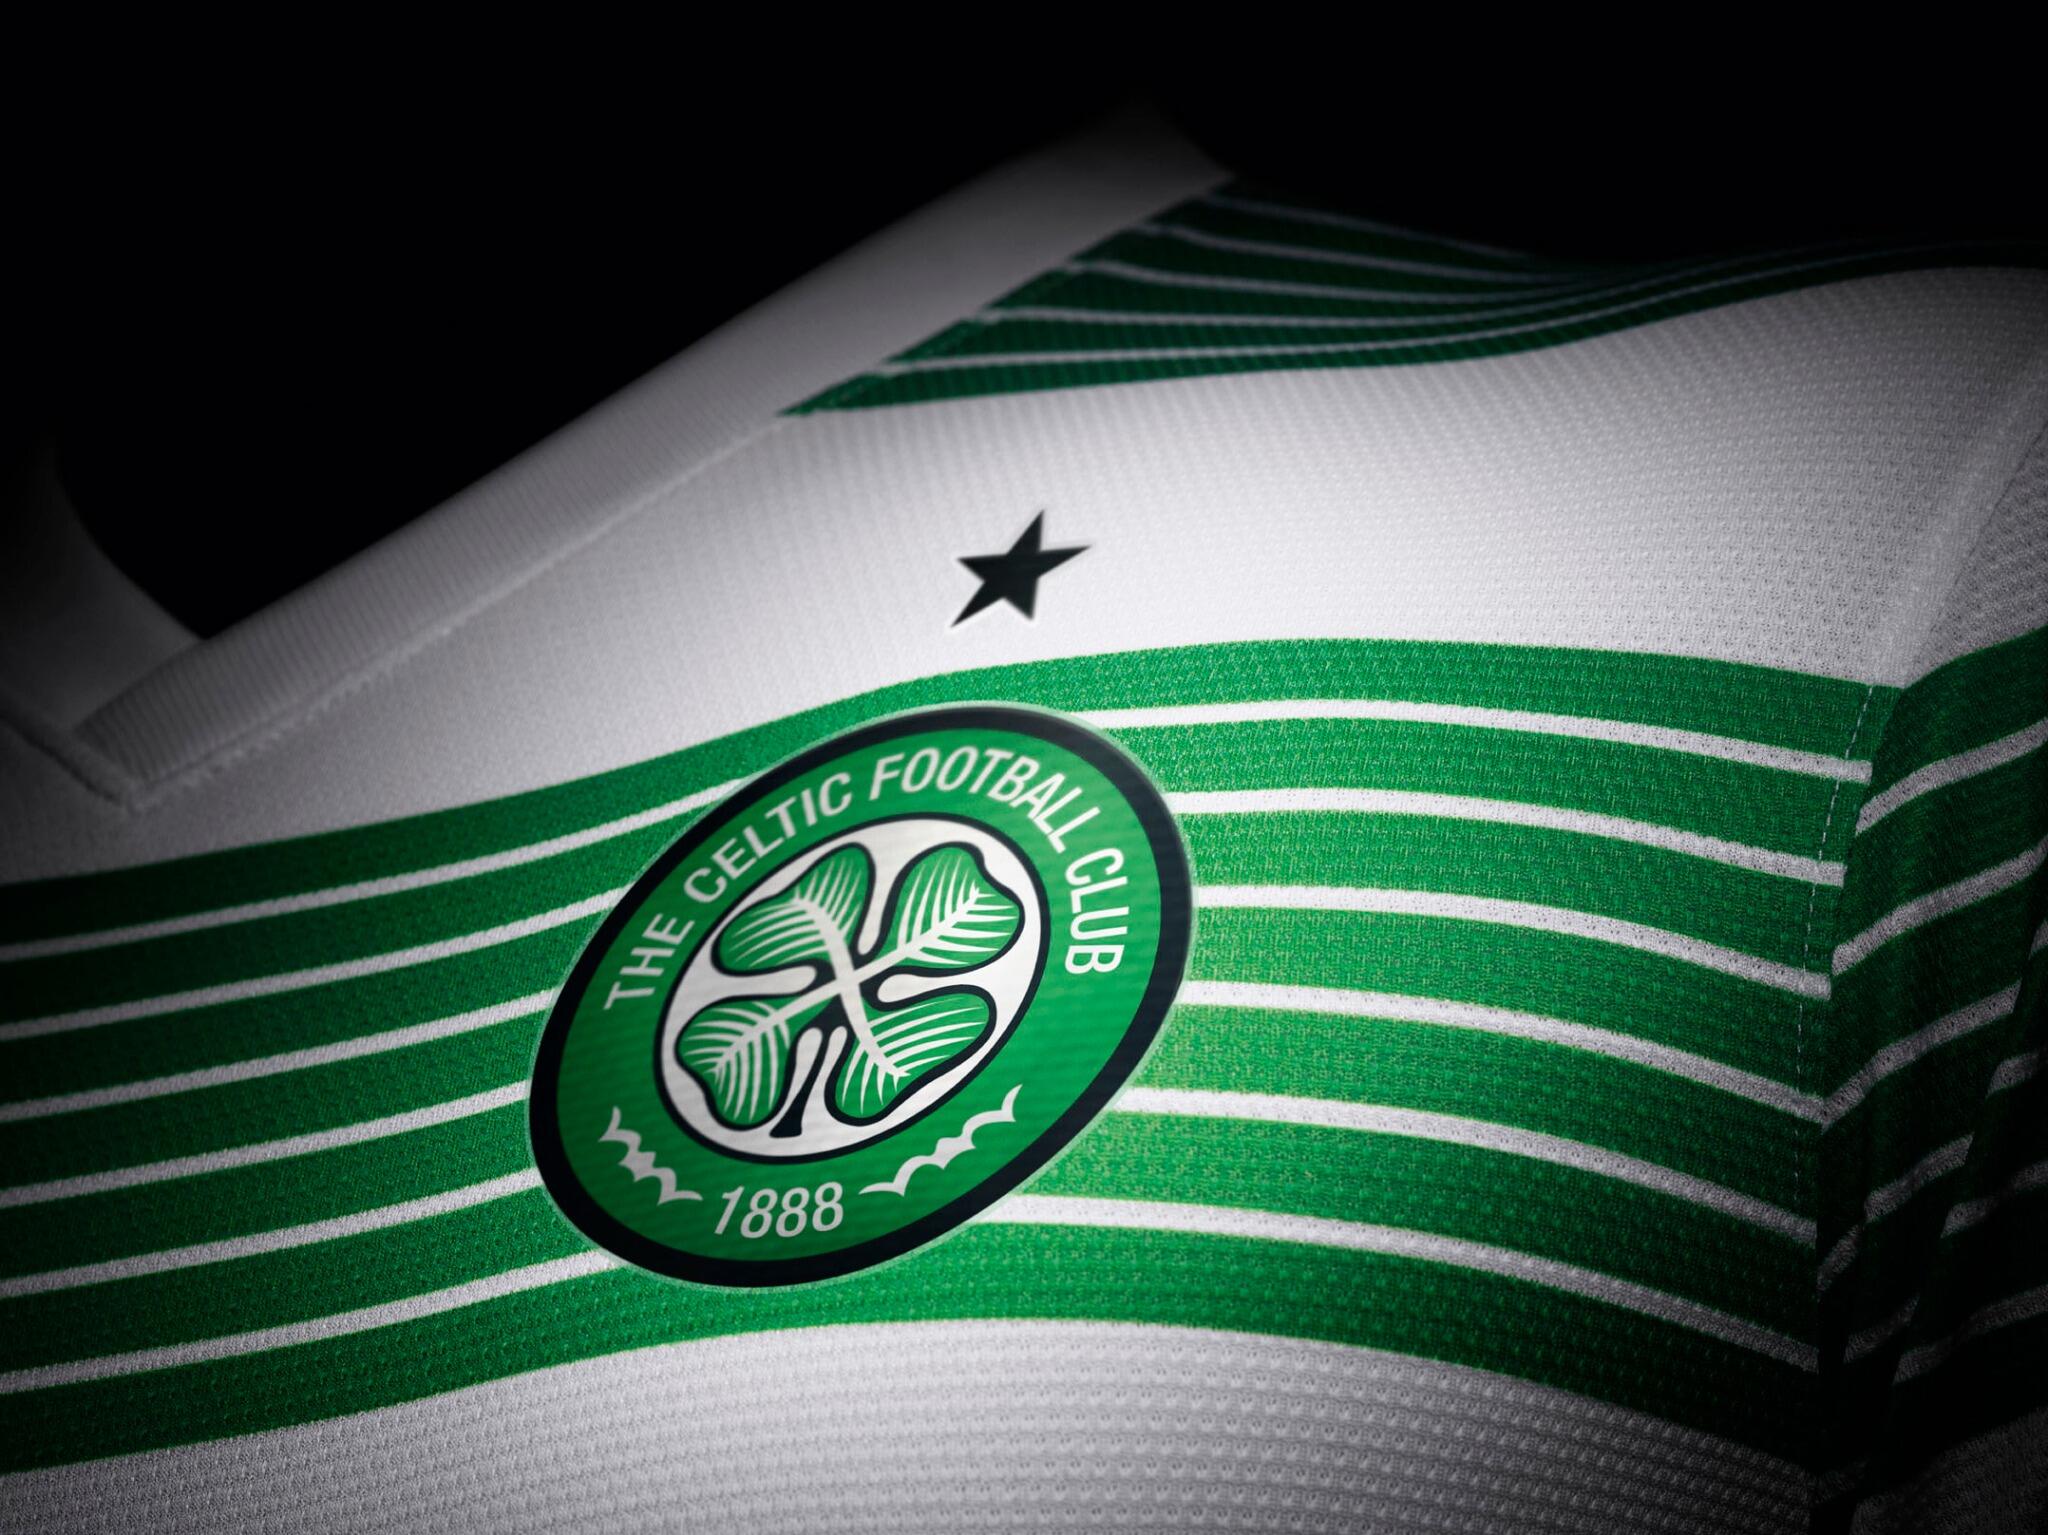 Celtic Football Club world famous Celtic club crest, as it appears on the new home shirt #BeCeltic7